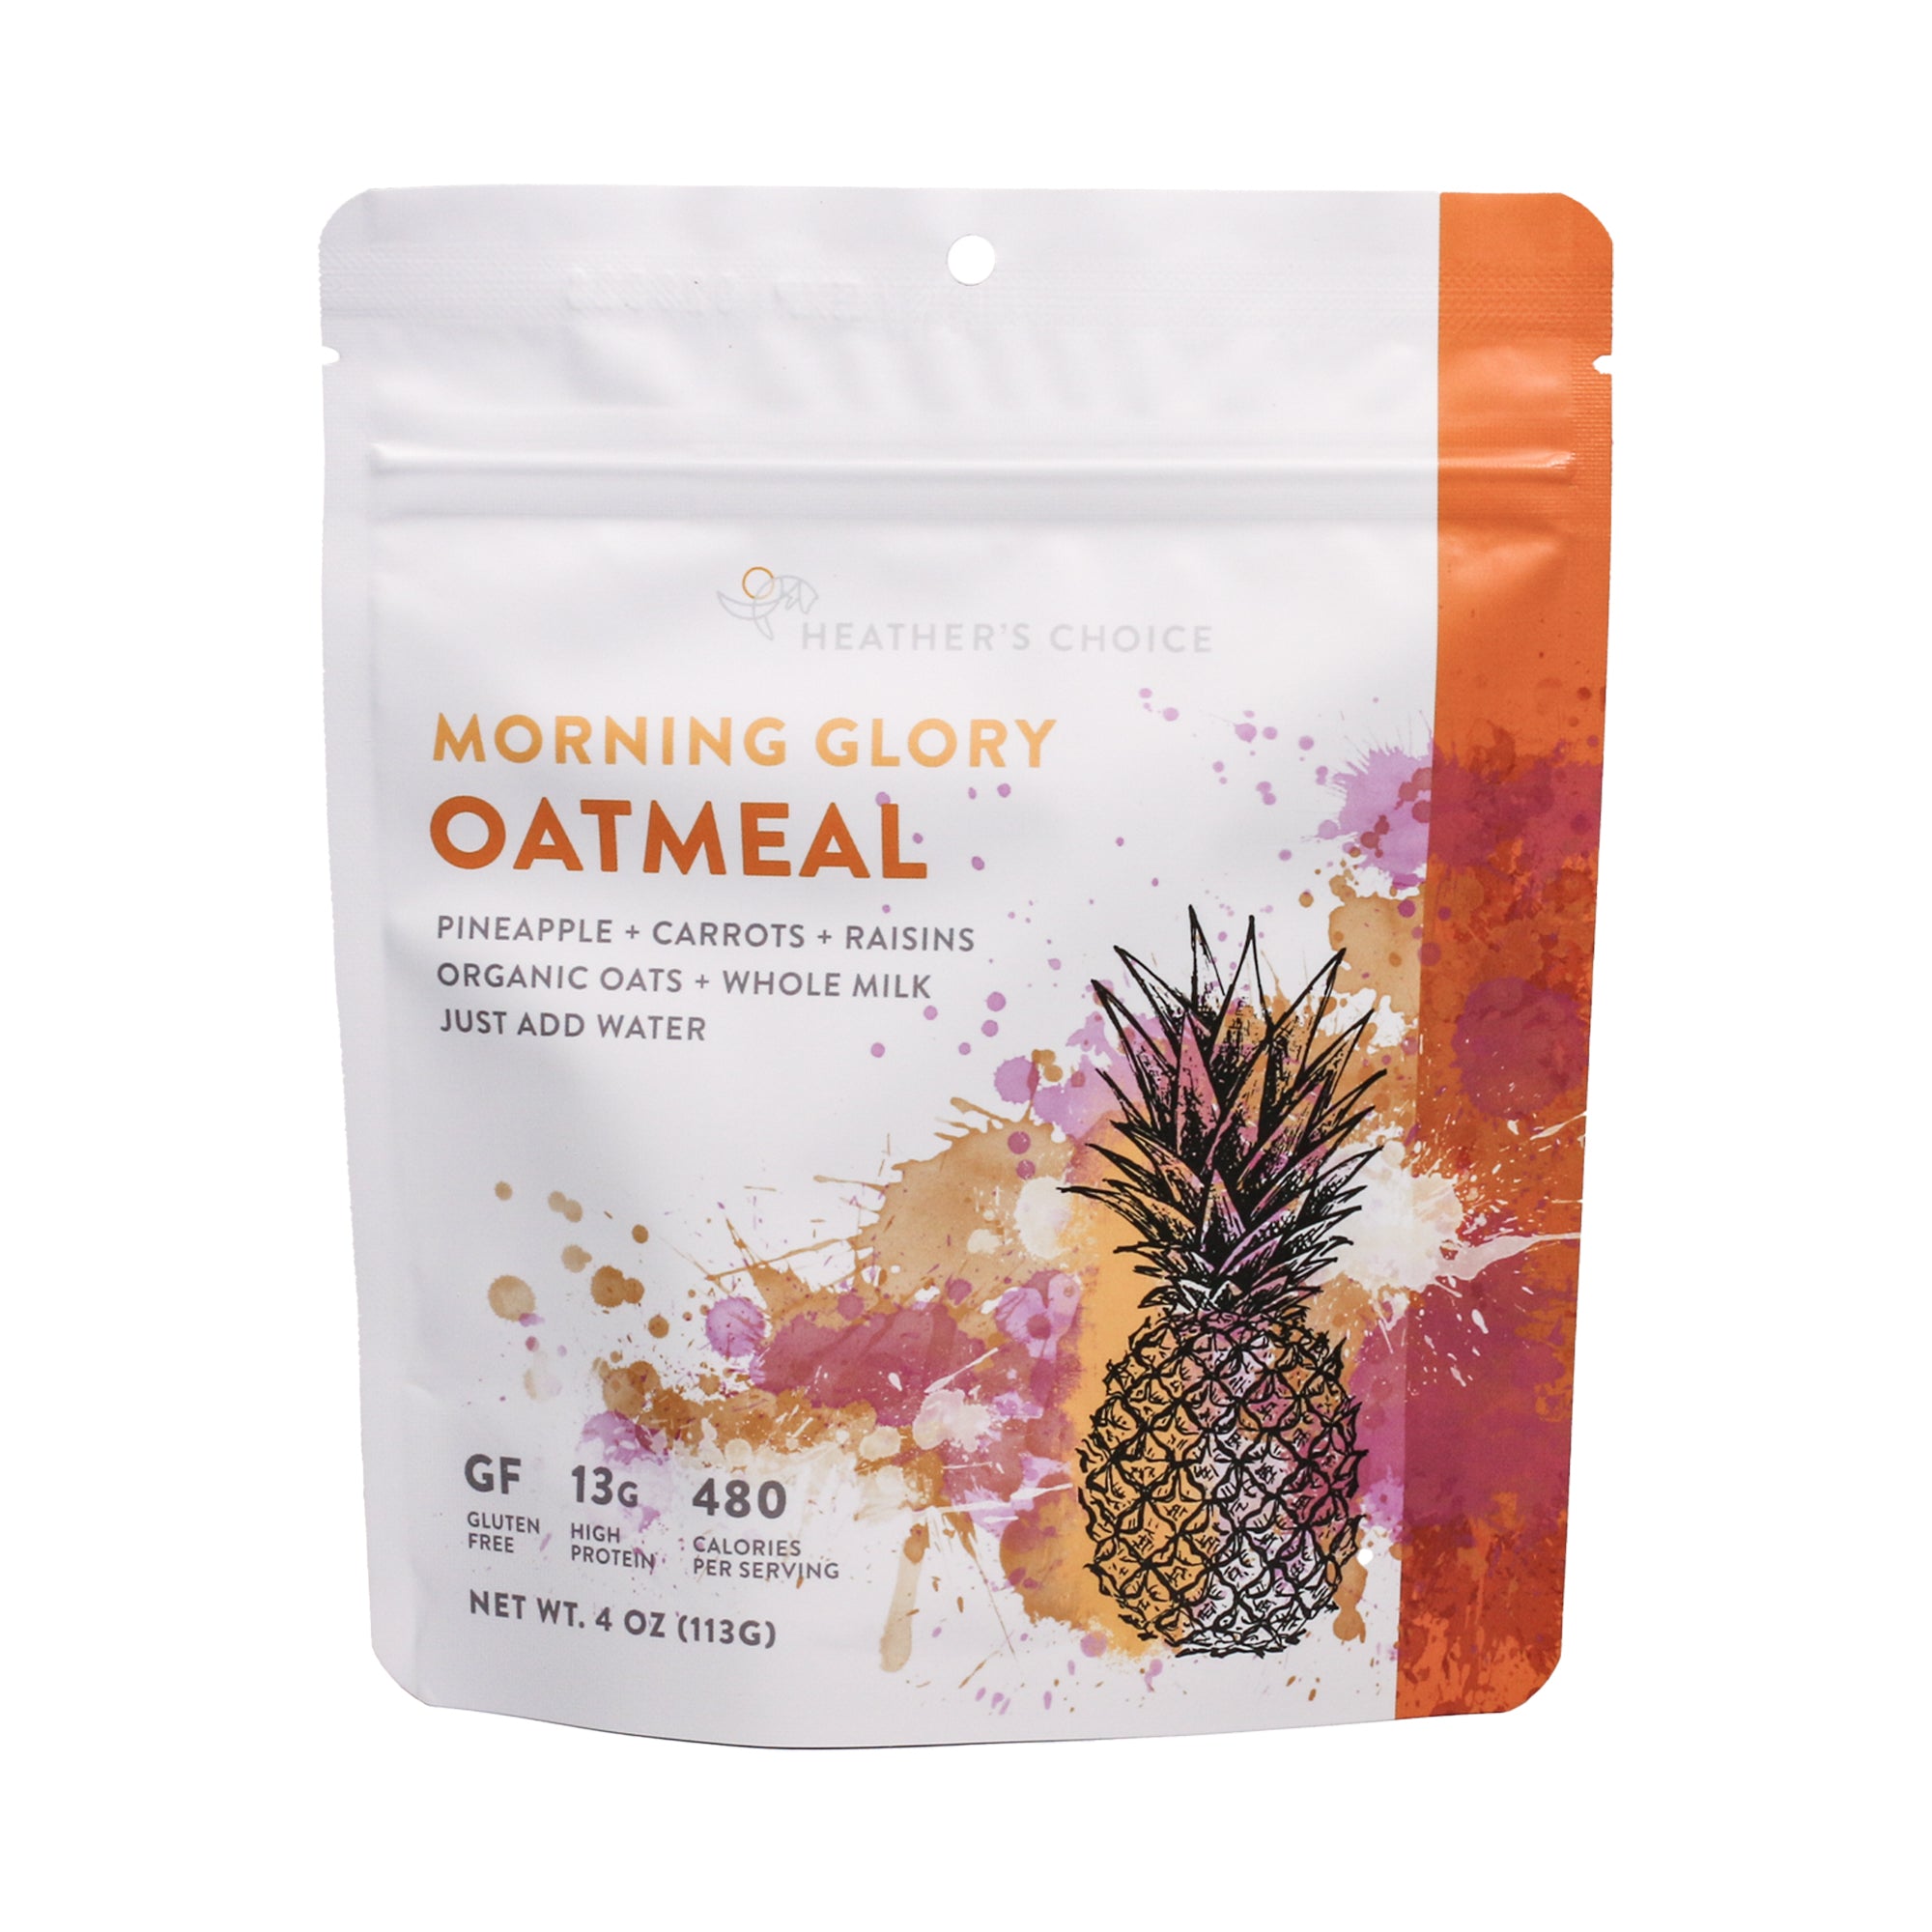 Morning Glory Oatmeal backpacking dehydrated breakfast - frontside of pouch